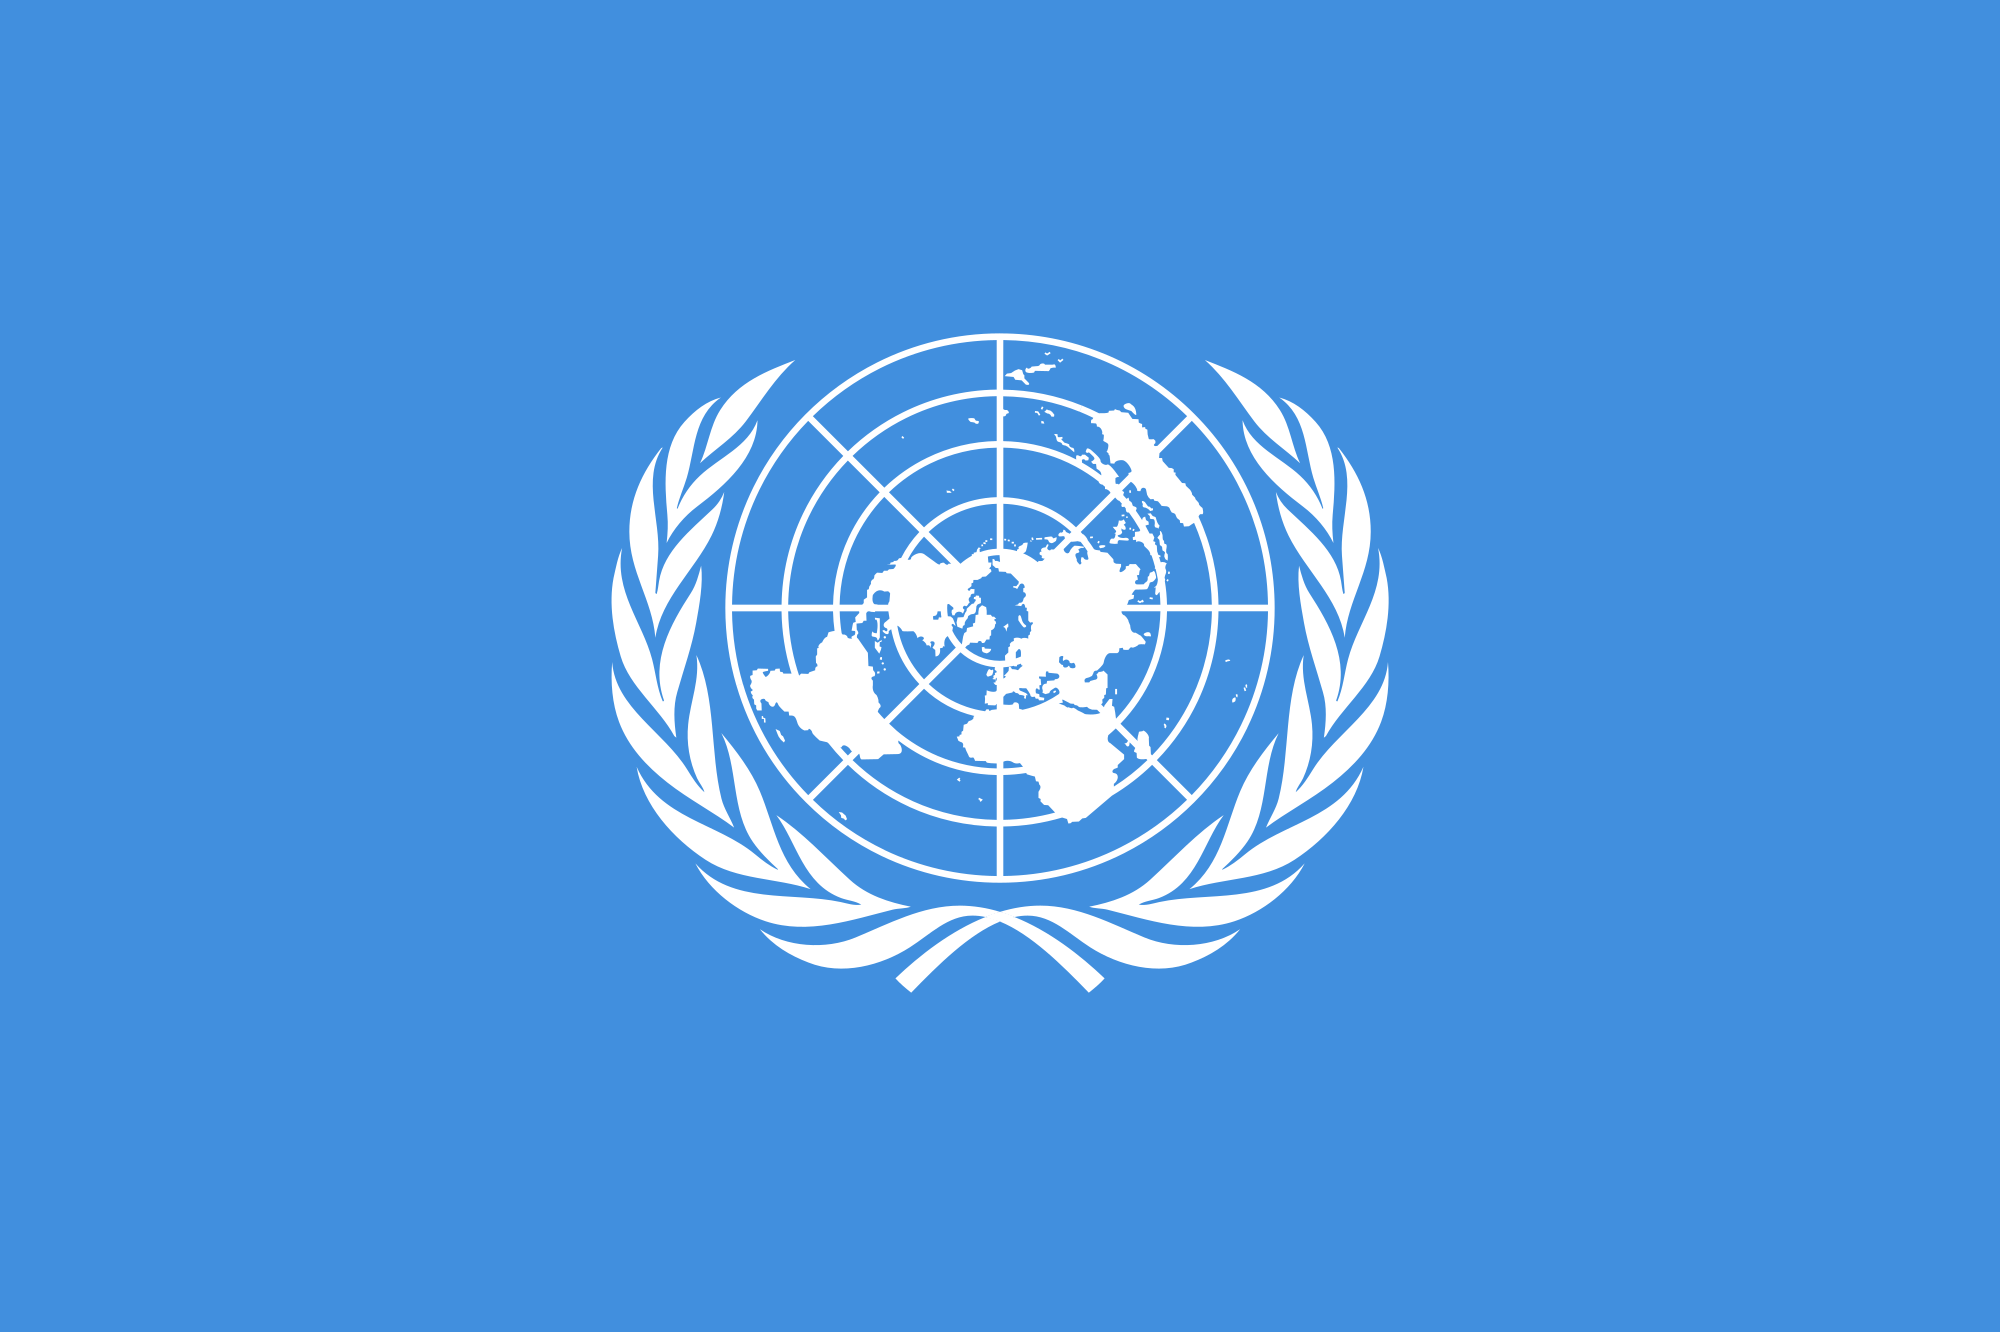 Inside Blue Circle with 3 Blue Lines Logo - Flag of the United Nations